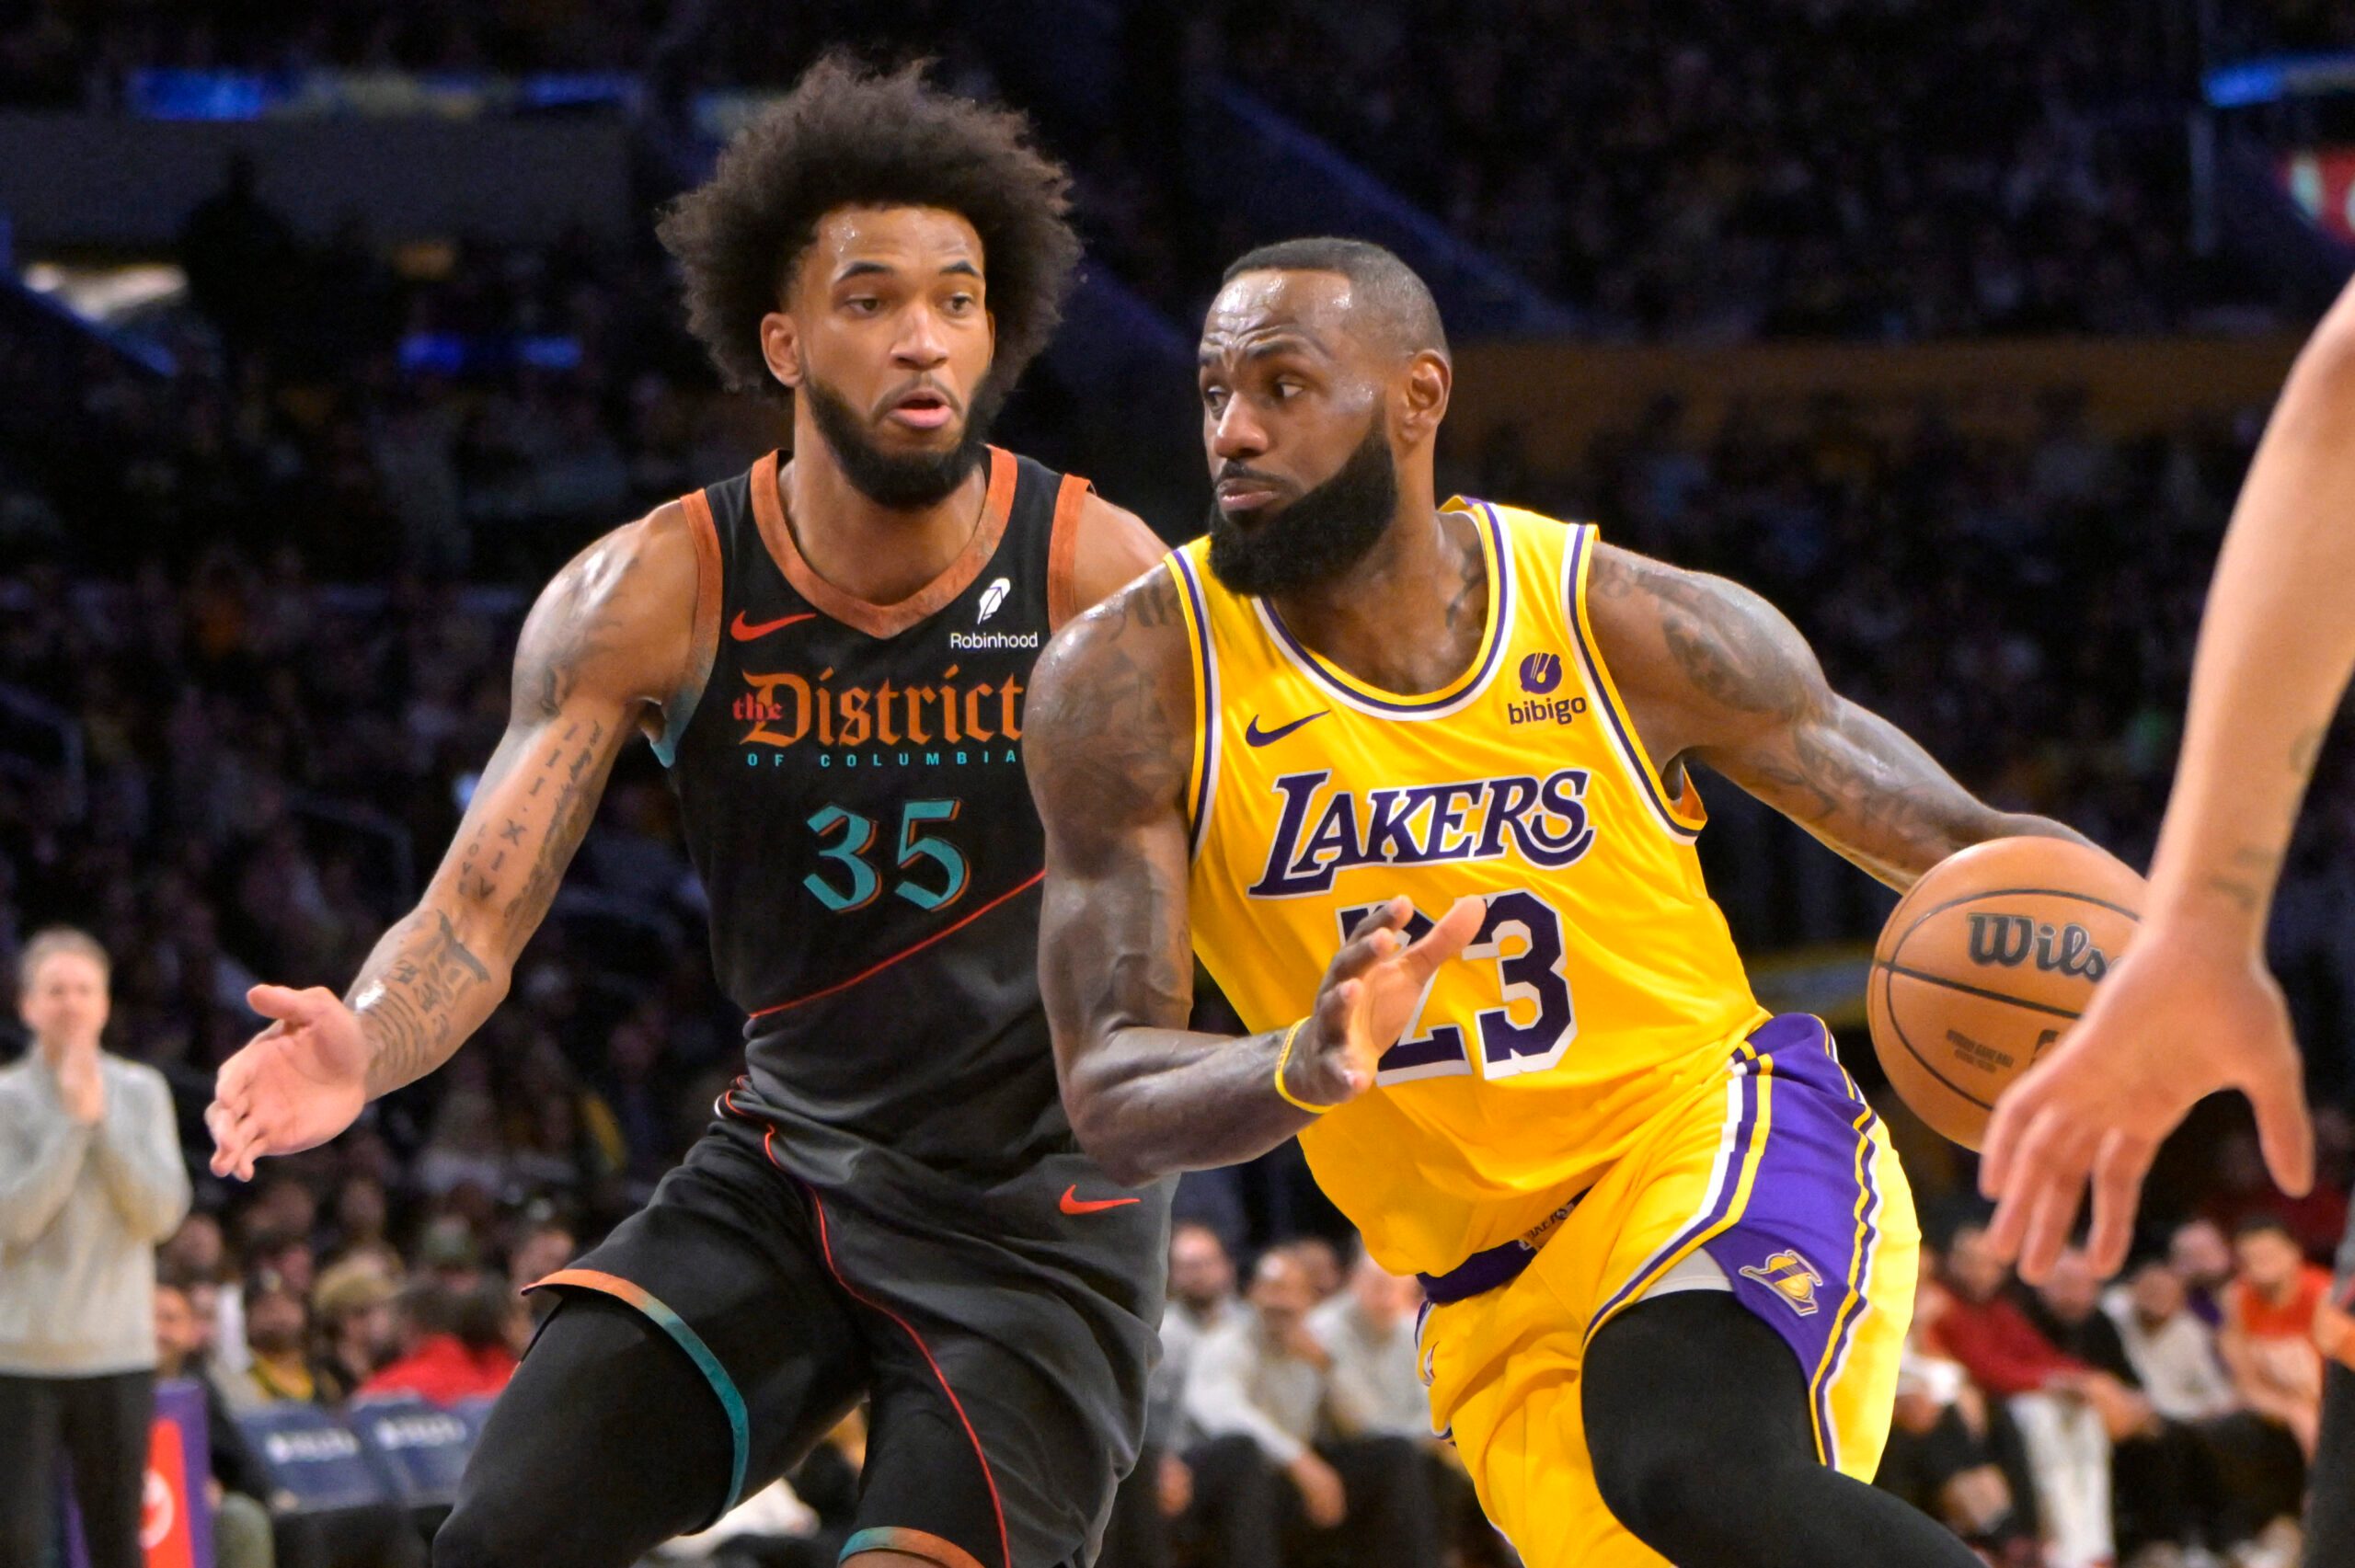 LeBron nears 40,000 mark as Lakers pull out OT win over Wizards